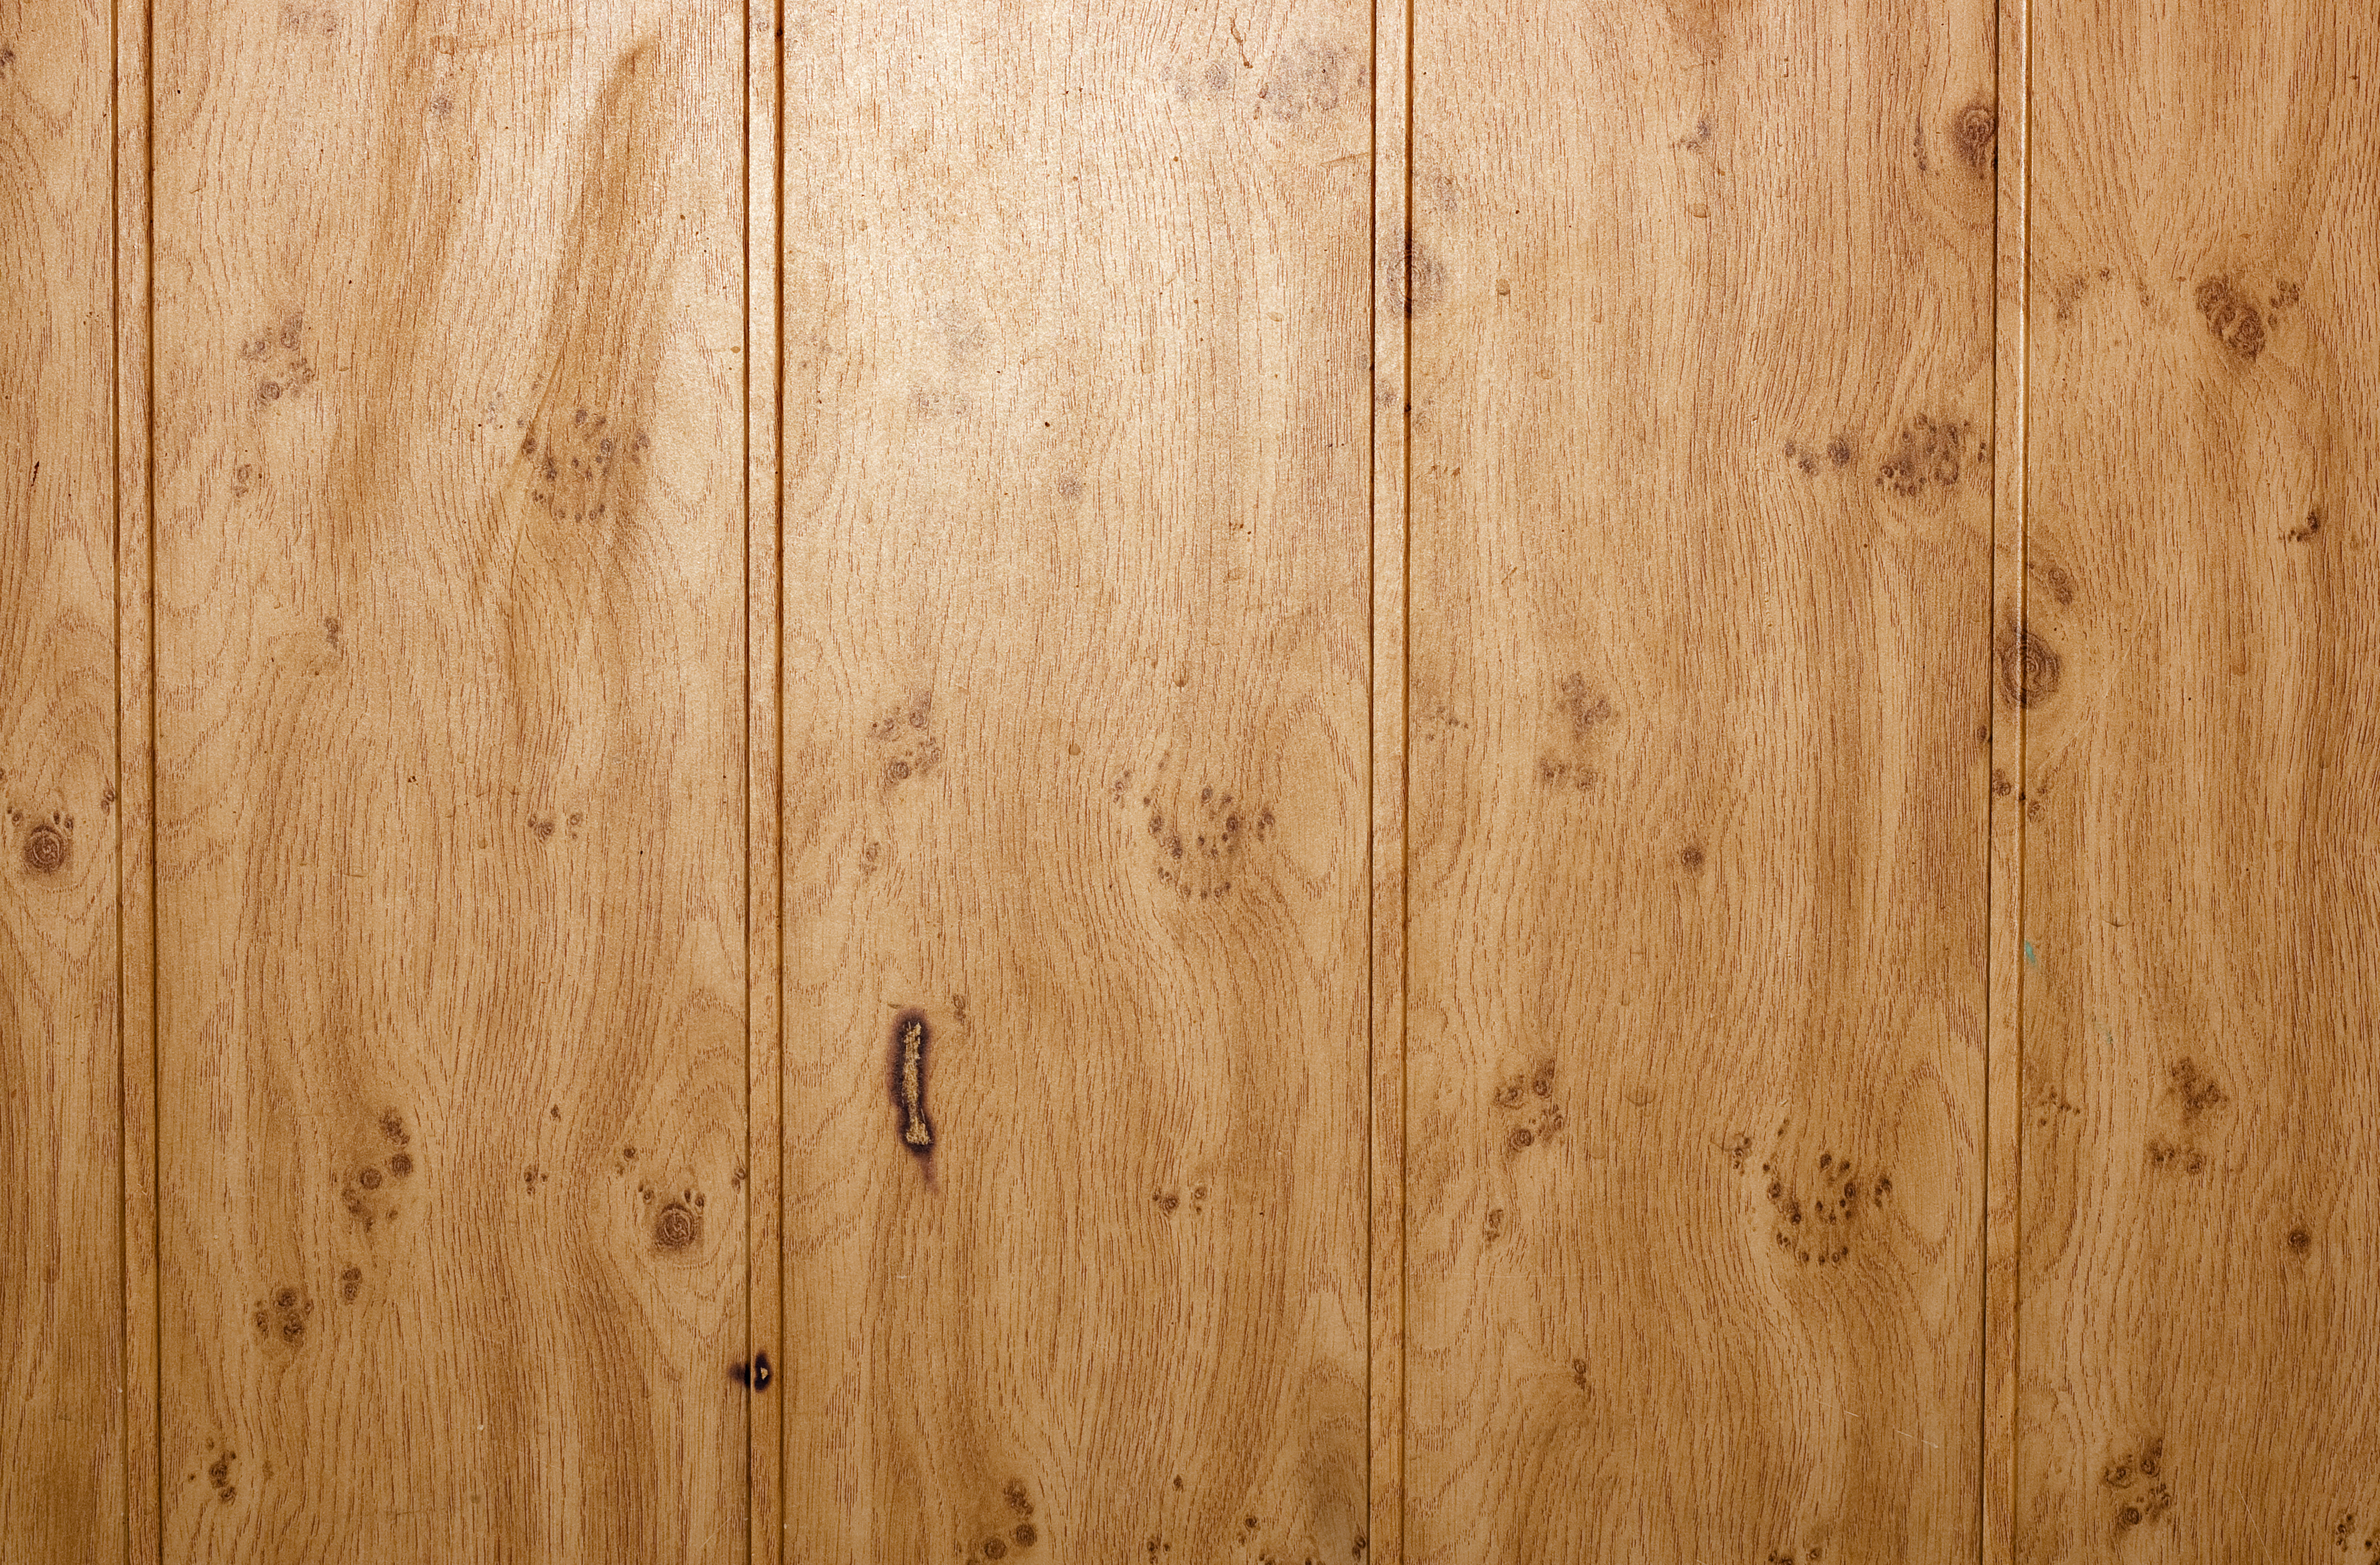 Wood Background, Board, Wood, Wall, Textured, HQ Photo